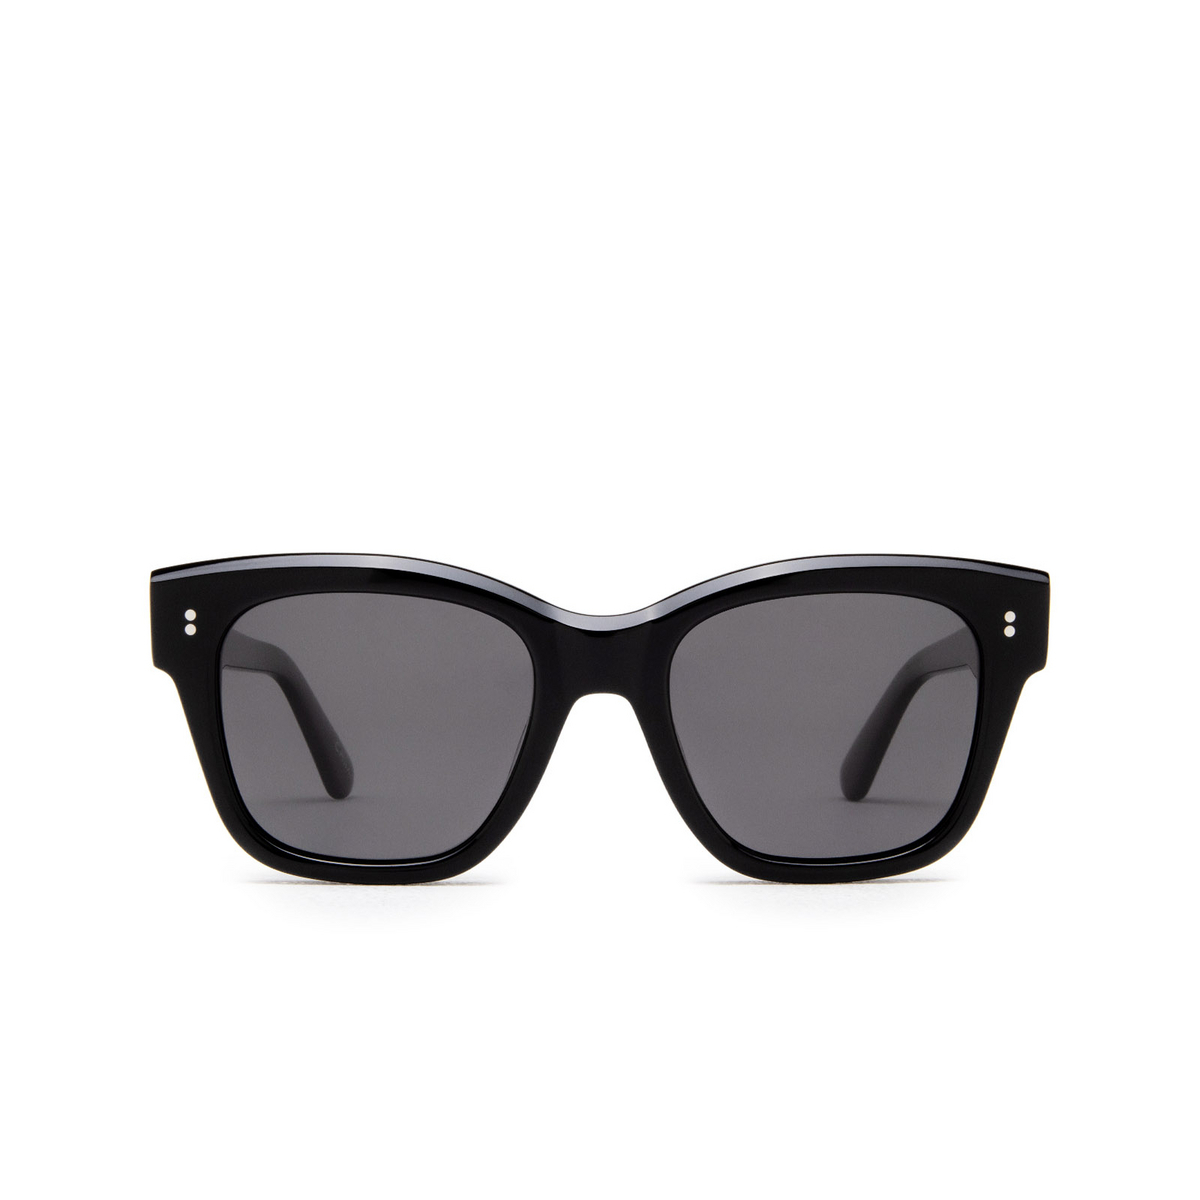 Chimi 07 Sunglasses BLACK - front view